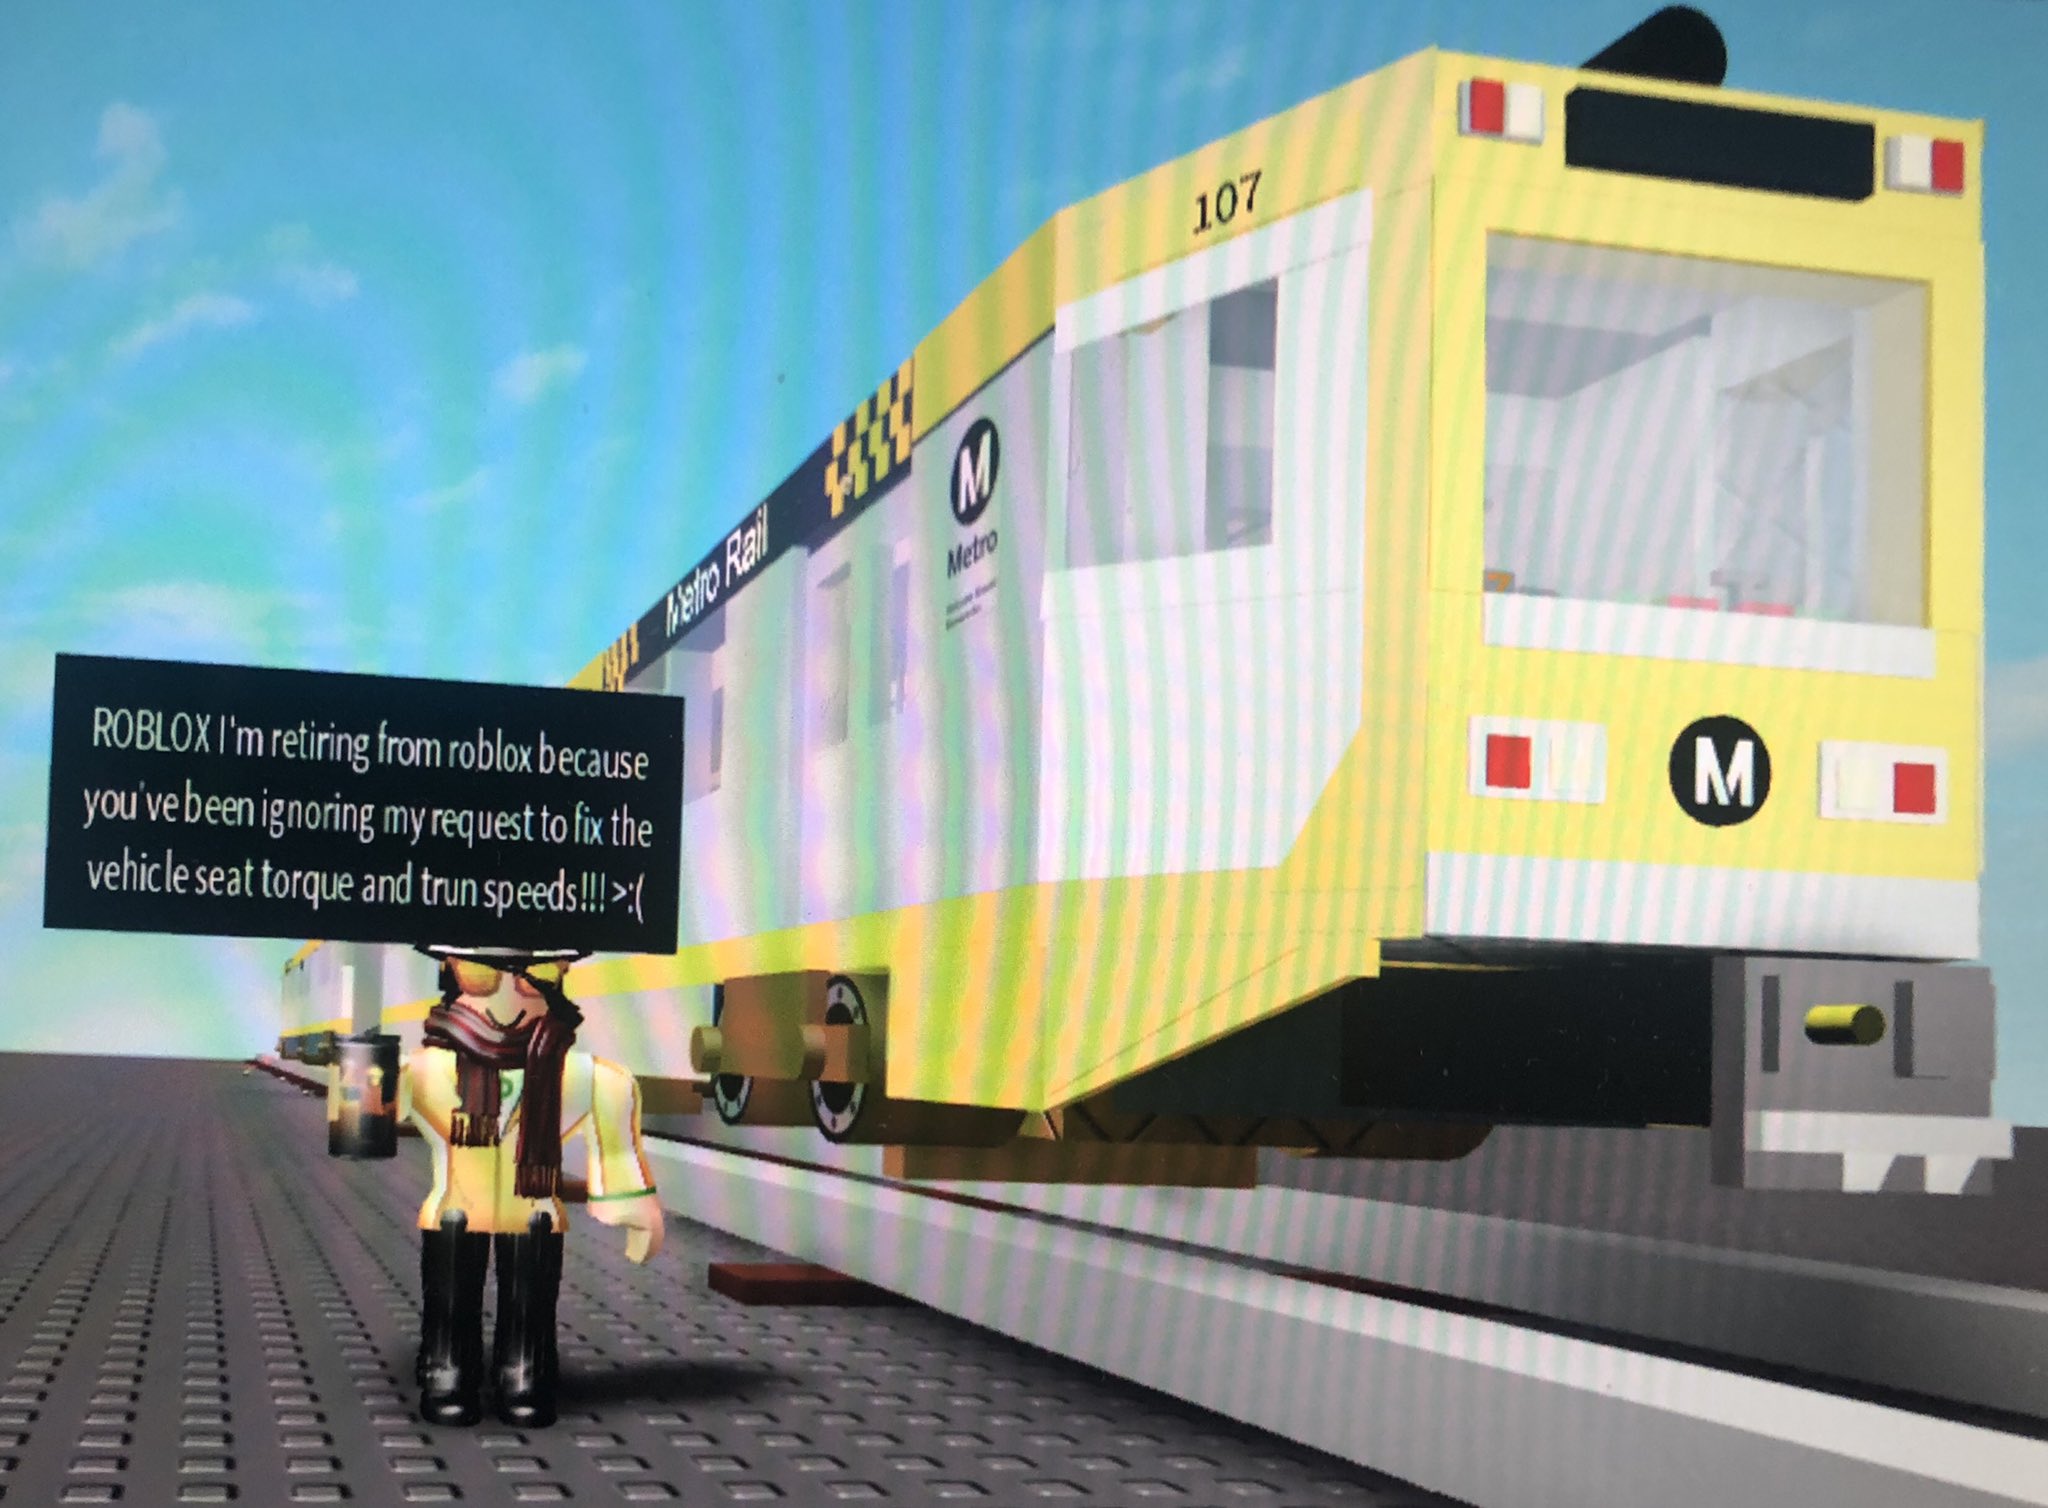 The Famous Rleon On Twitter Protesting Roblox - m train logo roblox